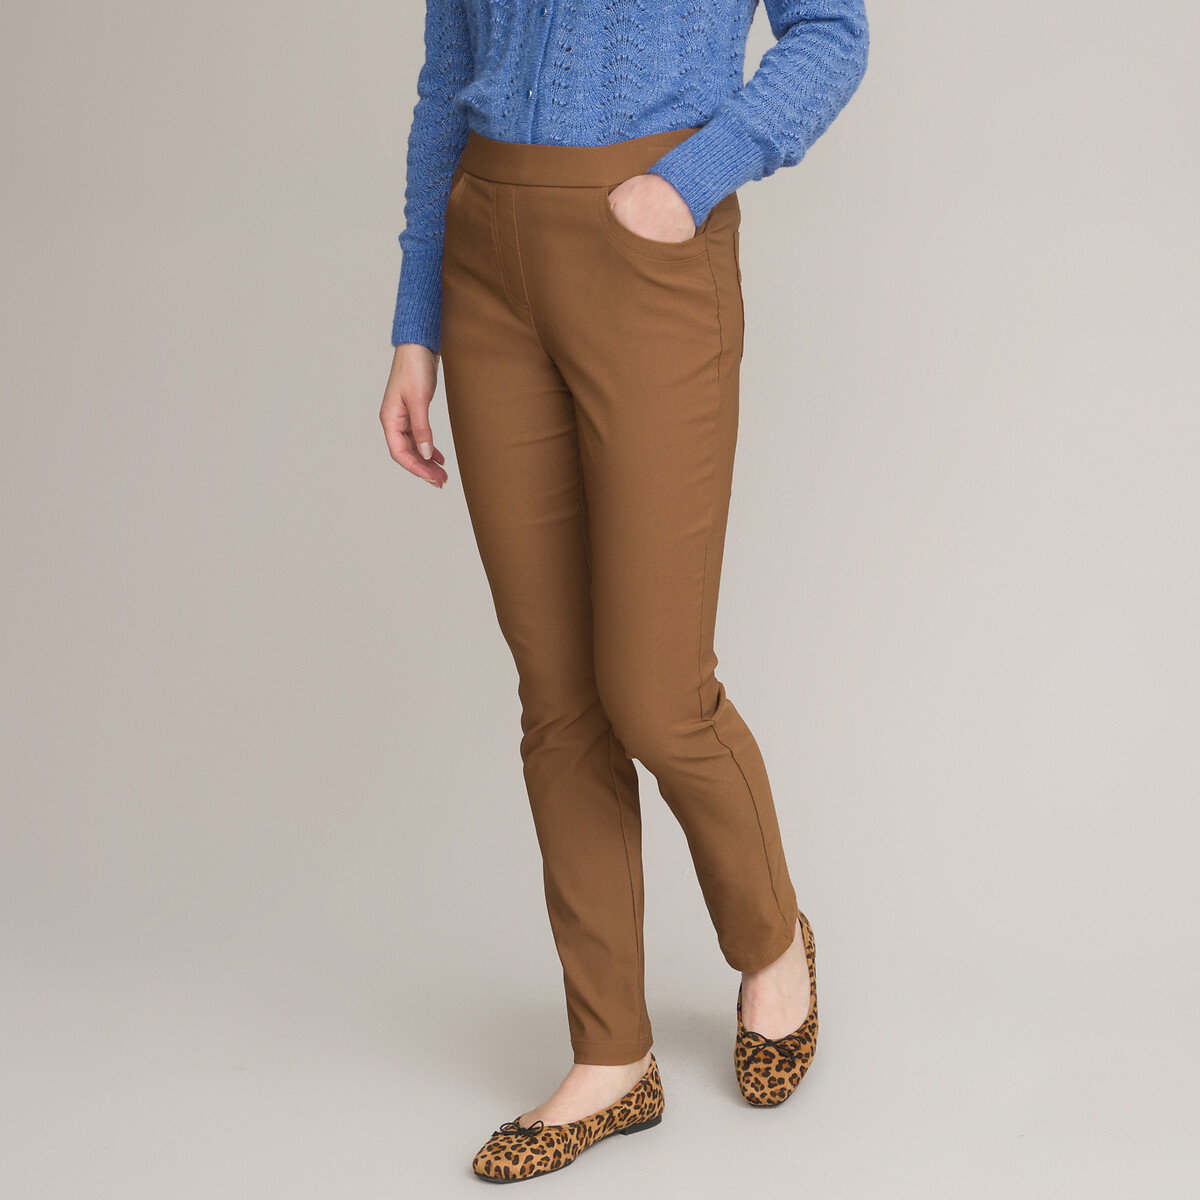 Image of Straight Pull-On Trousers, Length 30.5"